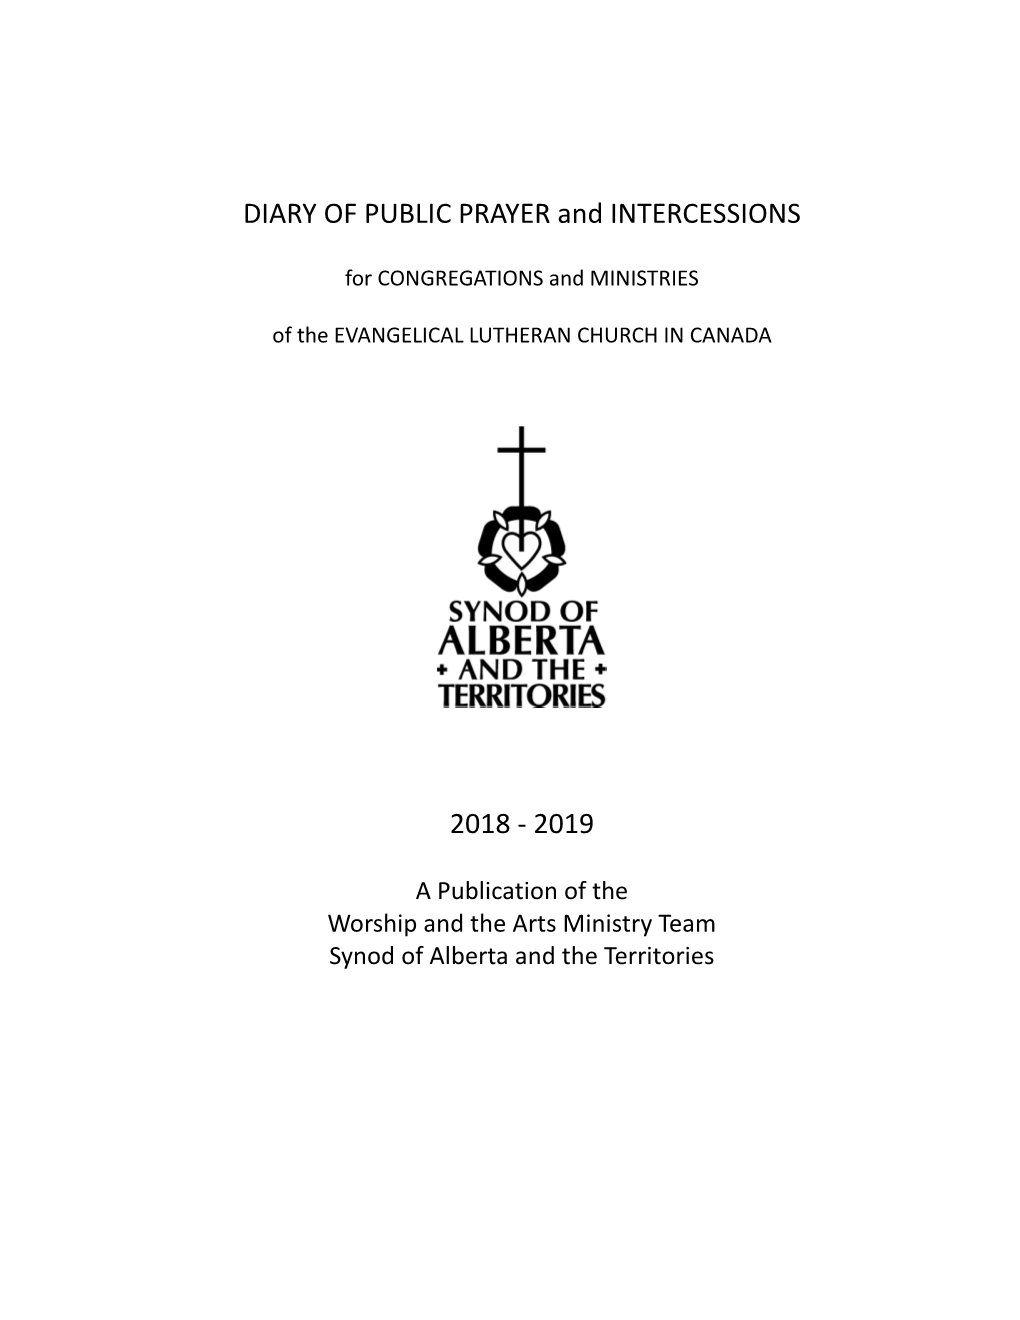 DIARY of PUBLIC PRAYER and INTERCESSIONS 2018